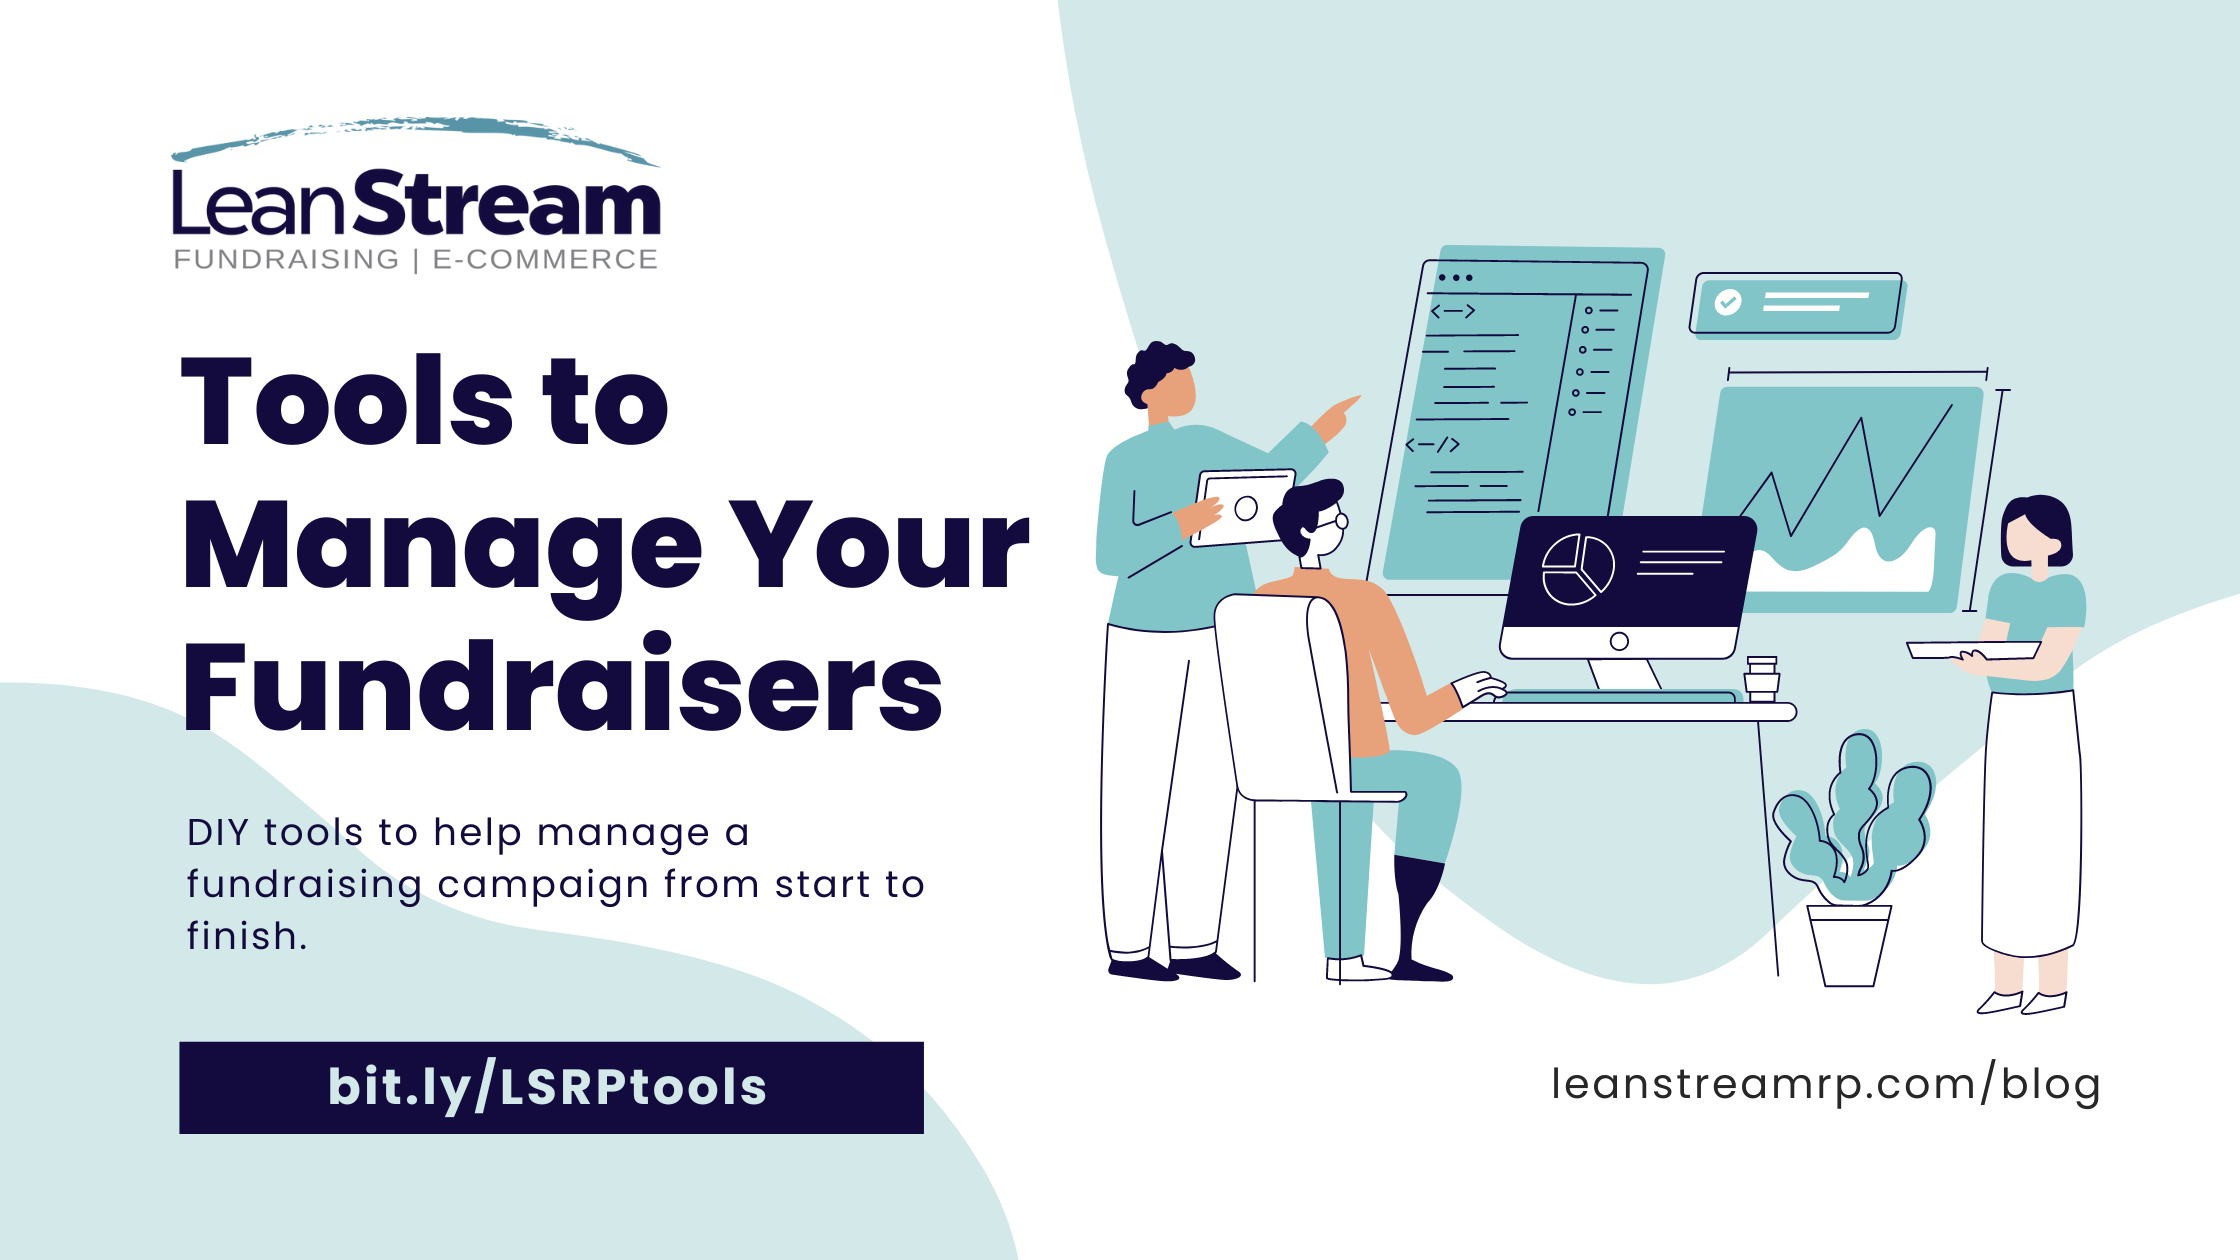 Tools to Help Manage Your Fundraisers